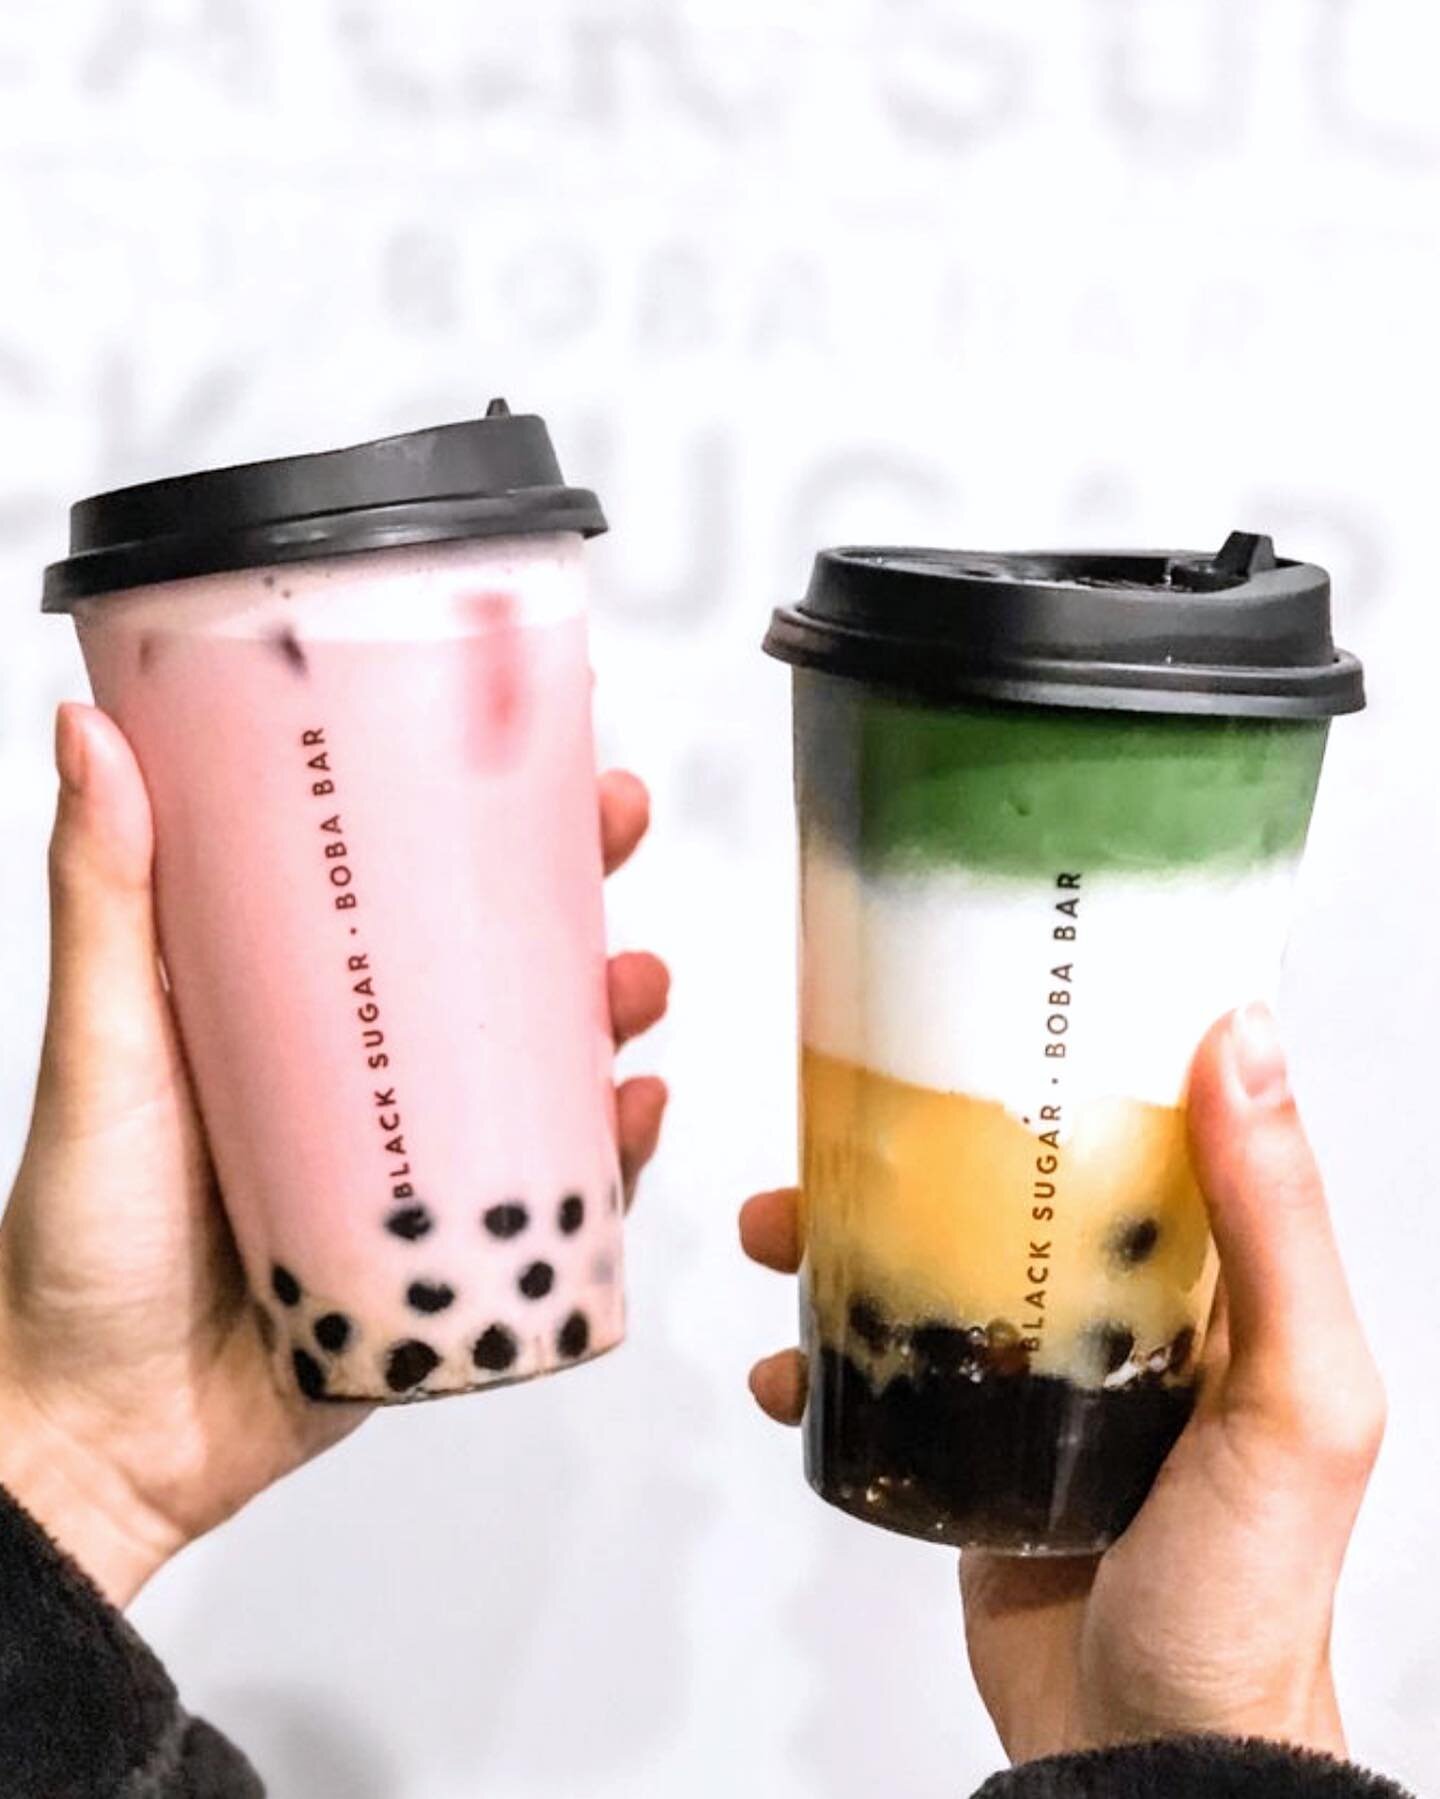 🥡 GIVEAWAY 🥡

For our first giveaway, we are teaming with up our friends at @blacksugarboba to give one lucky winner a prefixed meal for two (valued at $100) at Palette Tea Garden (San Mateo only) AND a $25 Black Sugar gift card! 

One lucky winner